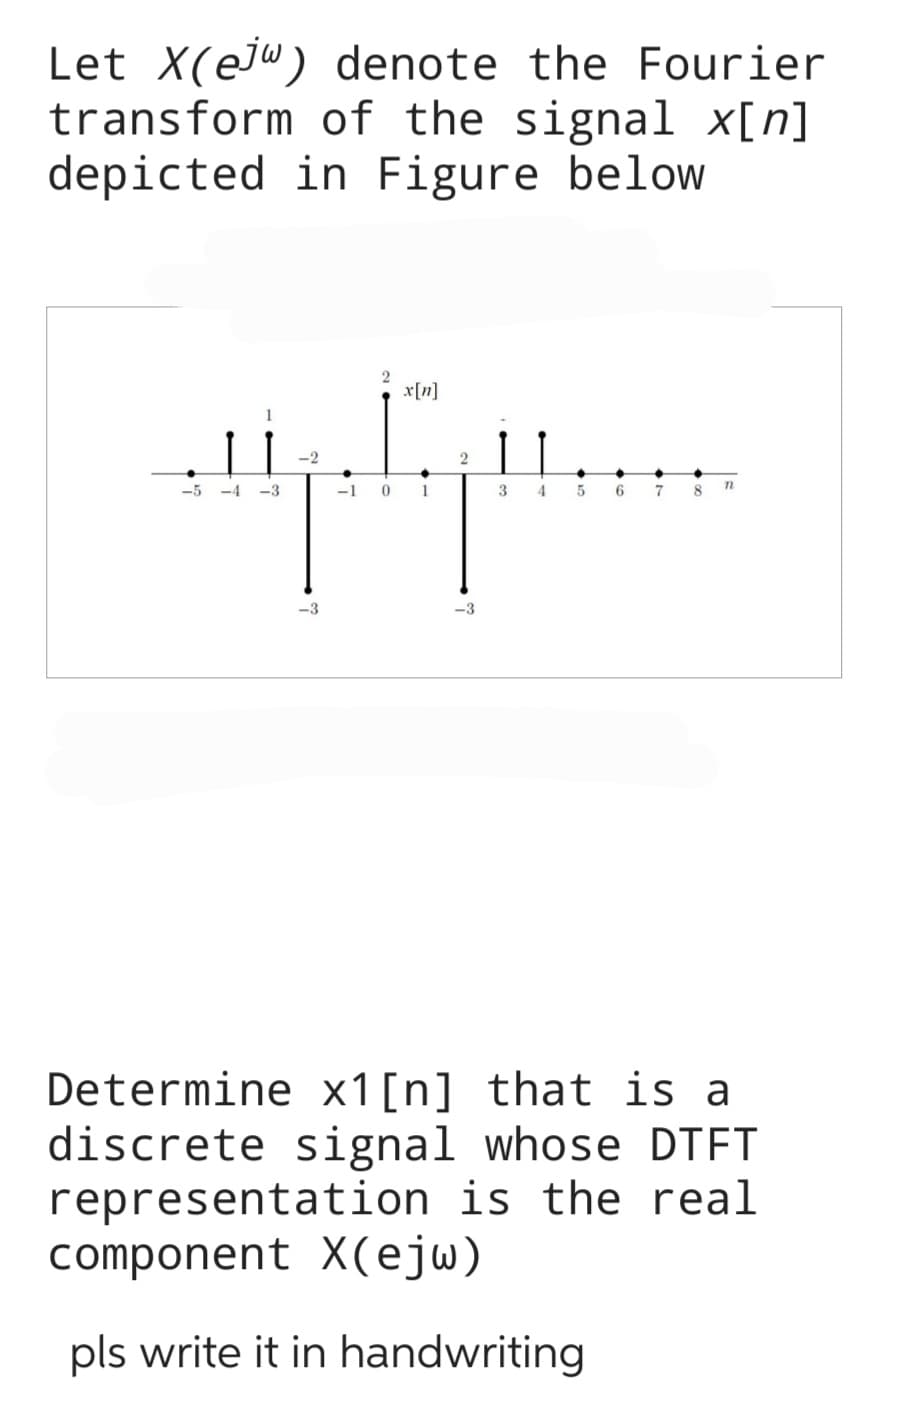 Let X(e) denote the Fourier
transform of the signal x[n]
depicted in Figure below
1
-5 -4 -3
-2
2
x[n]
-1 0 1
2
-3
3 4 5
6
7 8
n
Determine x1[n] that is a
discrete signal whose DTFT
representation is the real
component X(ejw)
pls write it in handwriting